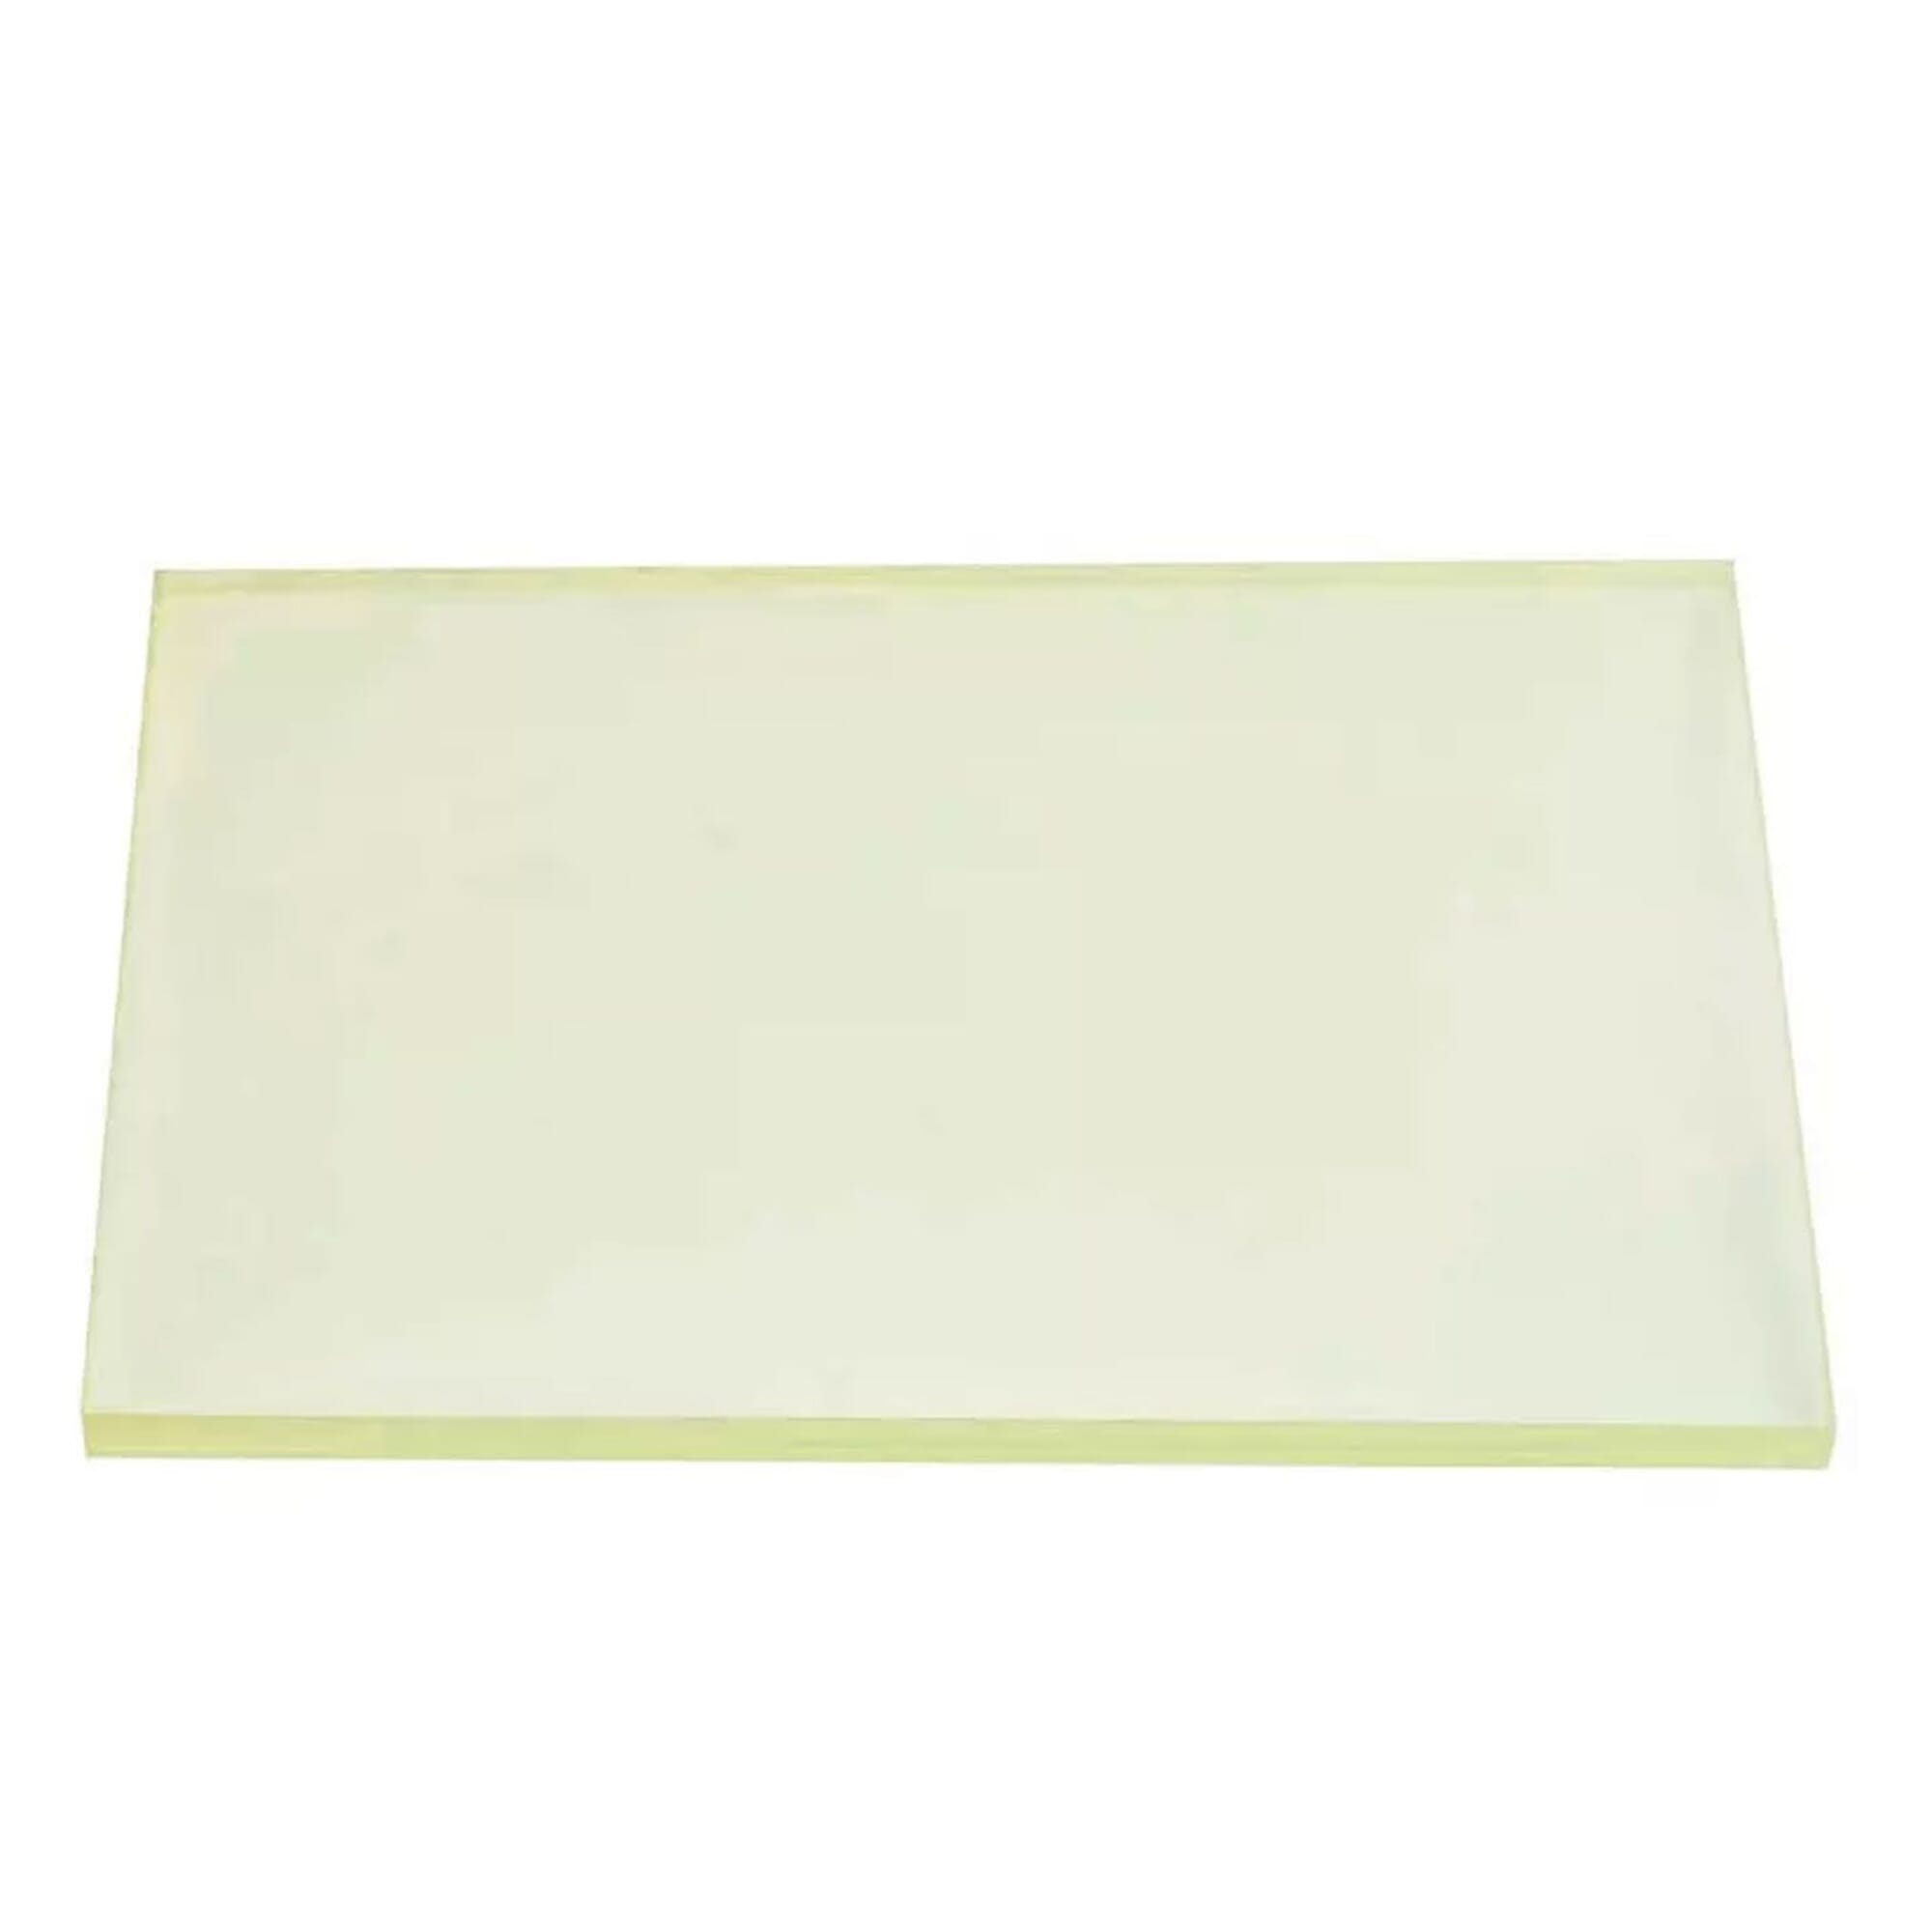 Leathercraft Tool 300x200mm & 200x150mm Polyurethane Flexible Translucent  Safety Cutting Board Mat, for Cutting Leather